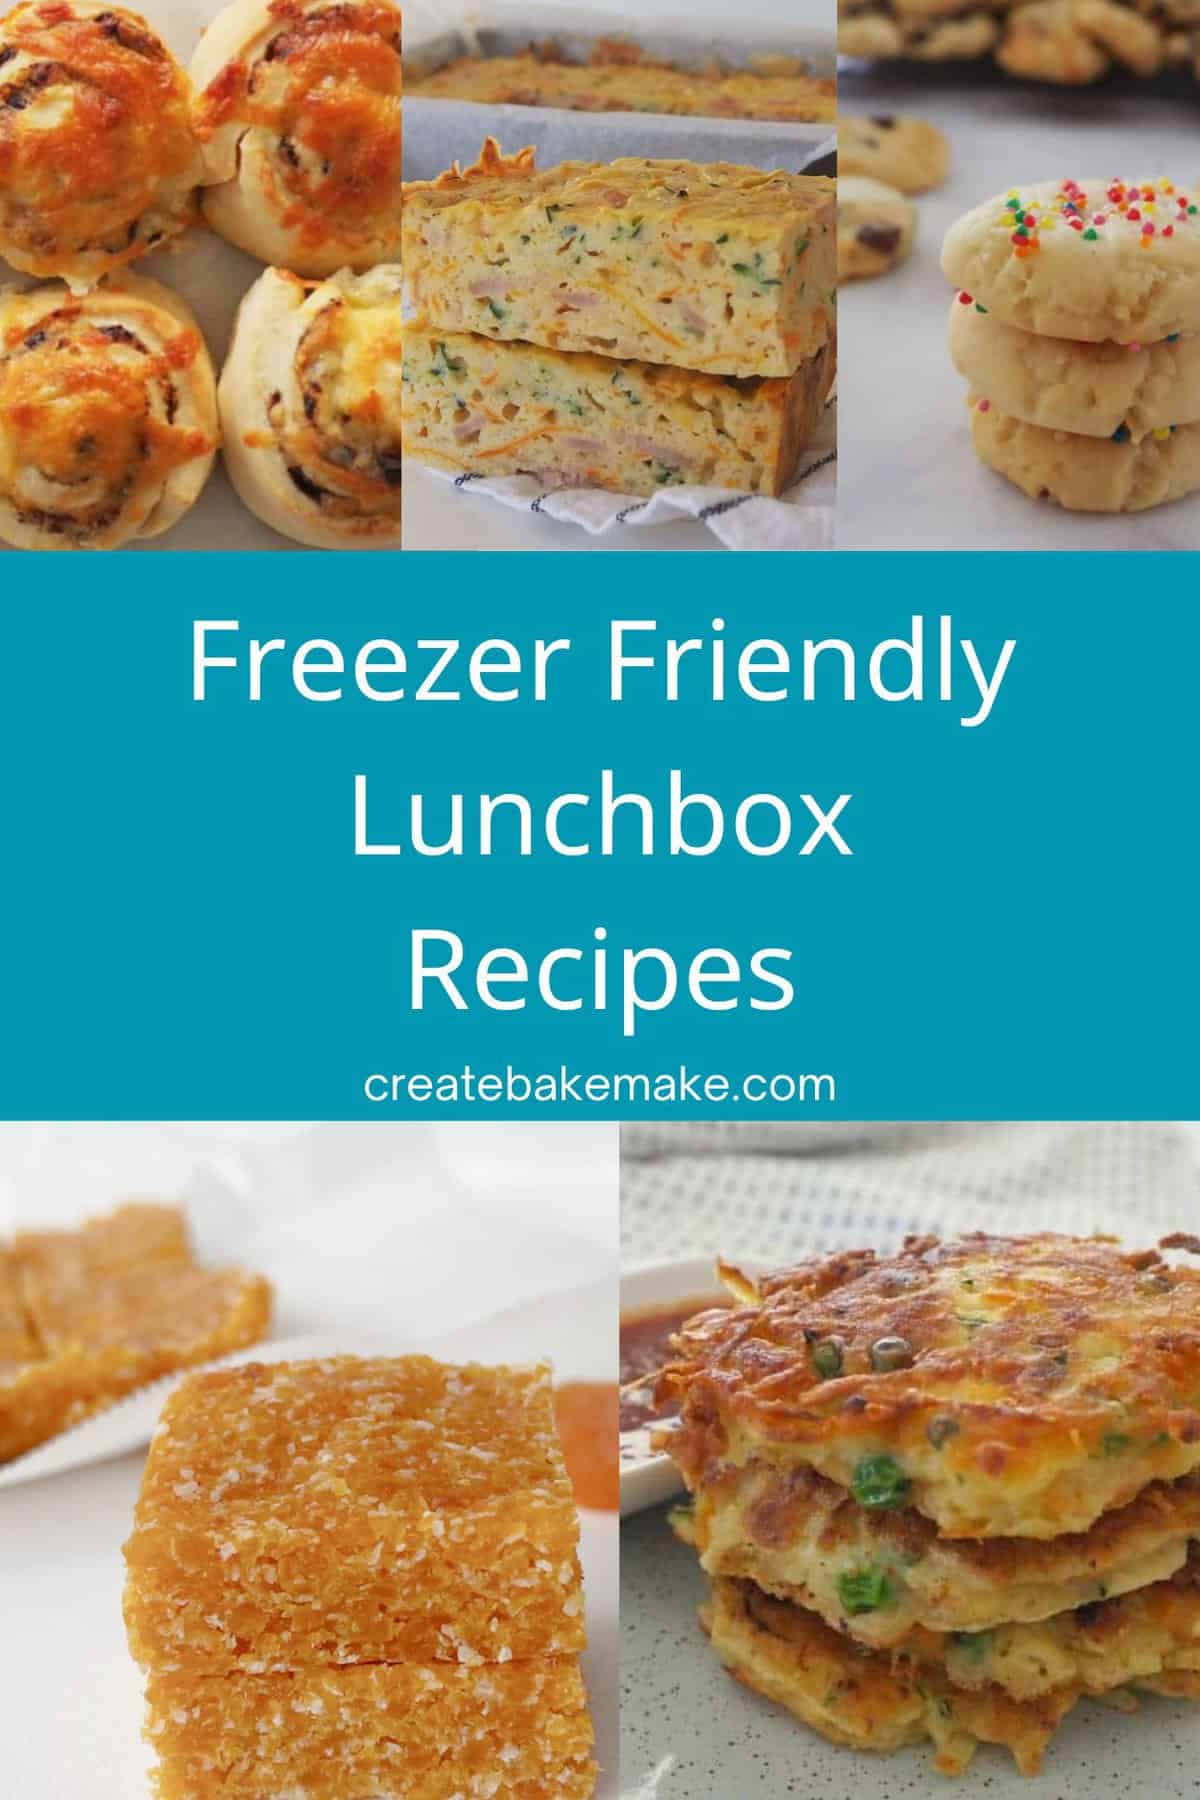 Collage of freezer friendly lunchbox recipes.